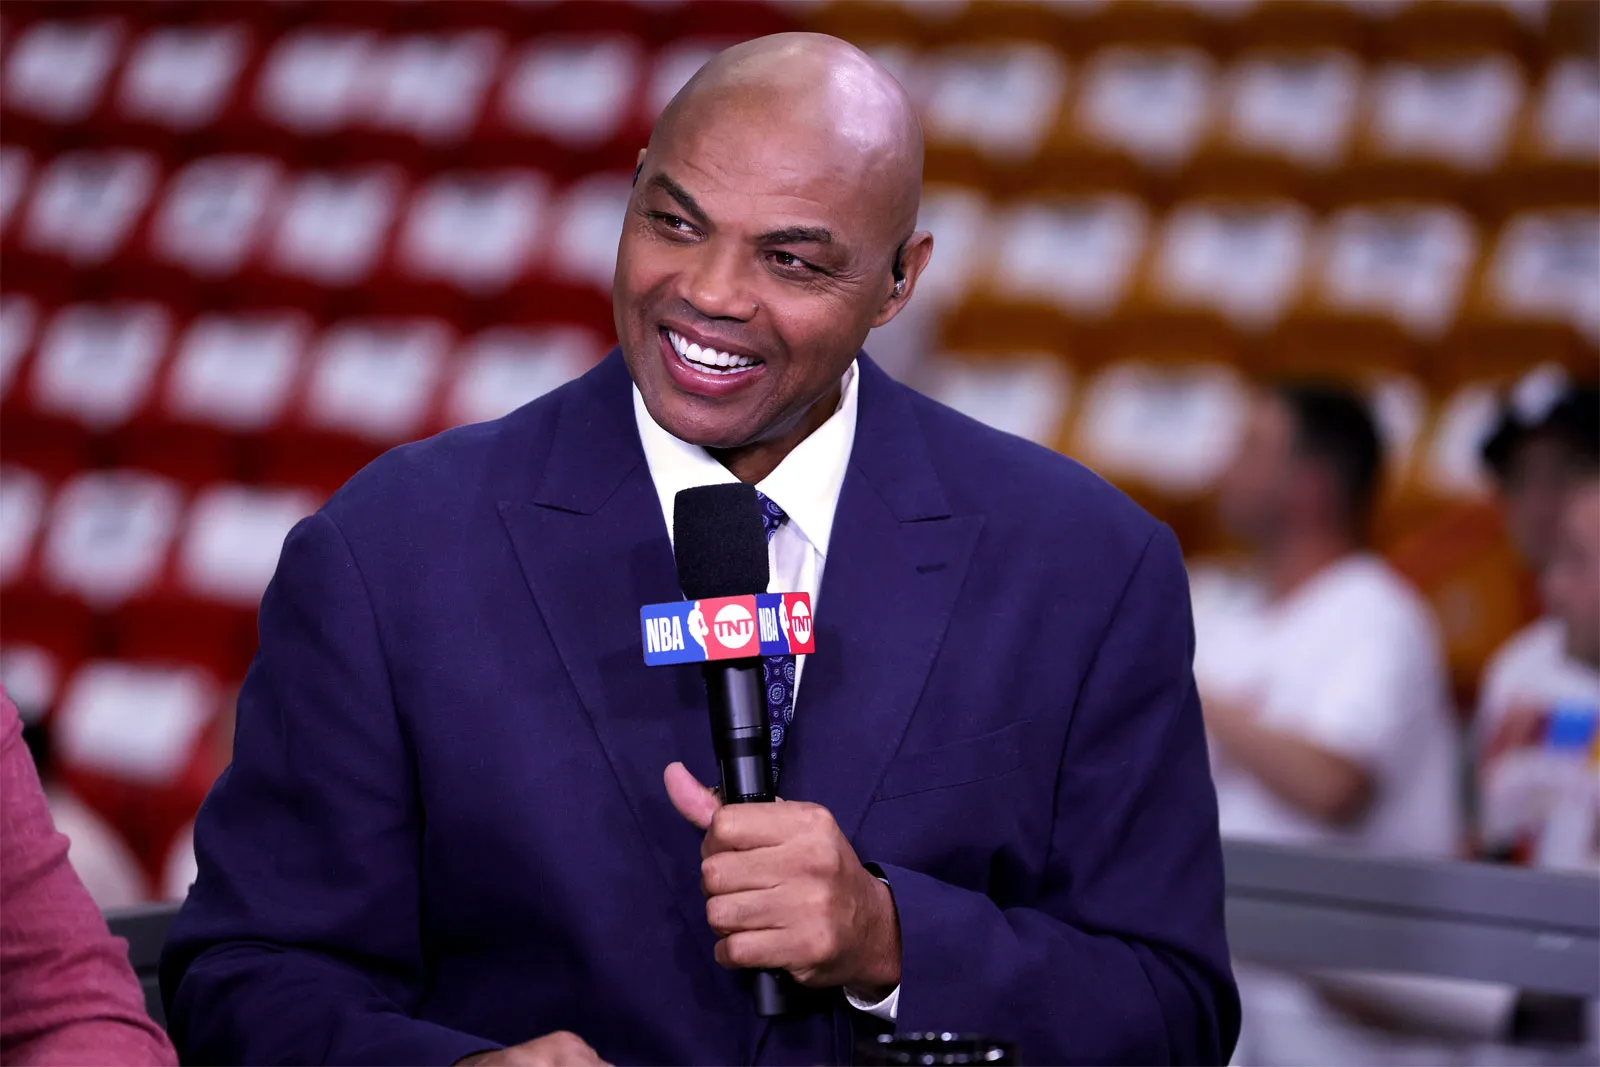 Charles Barkley Predicts the End of NBA on TNT